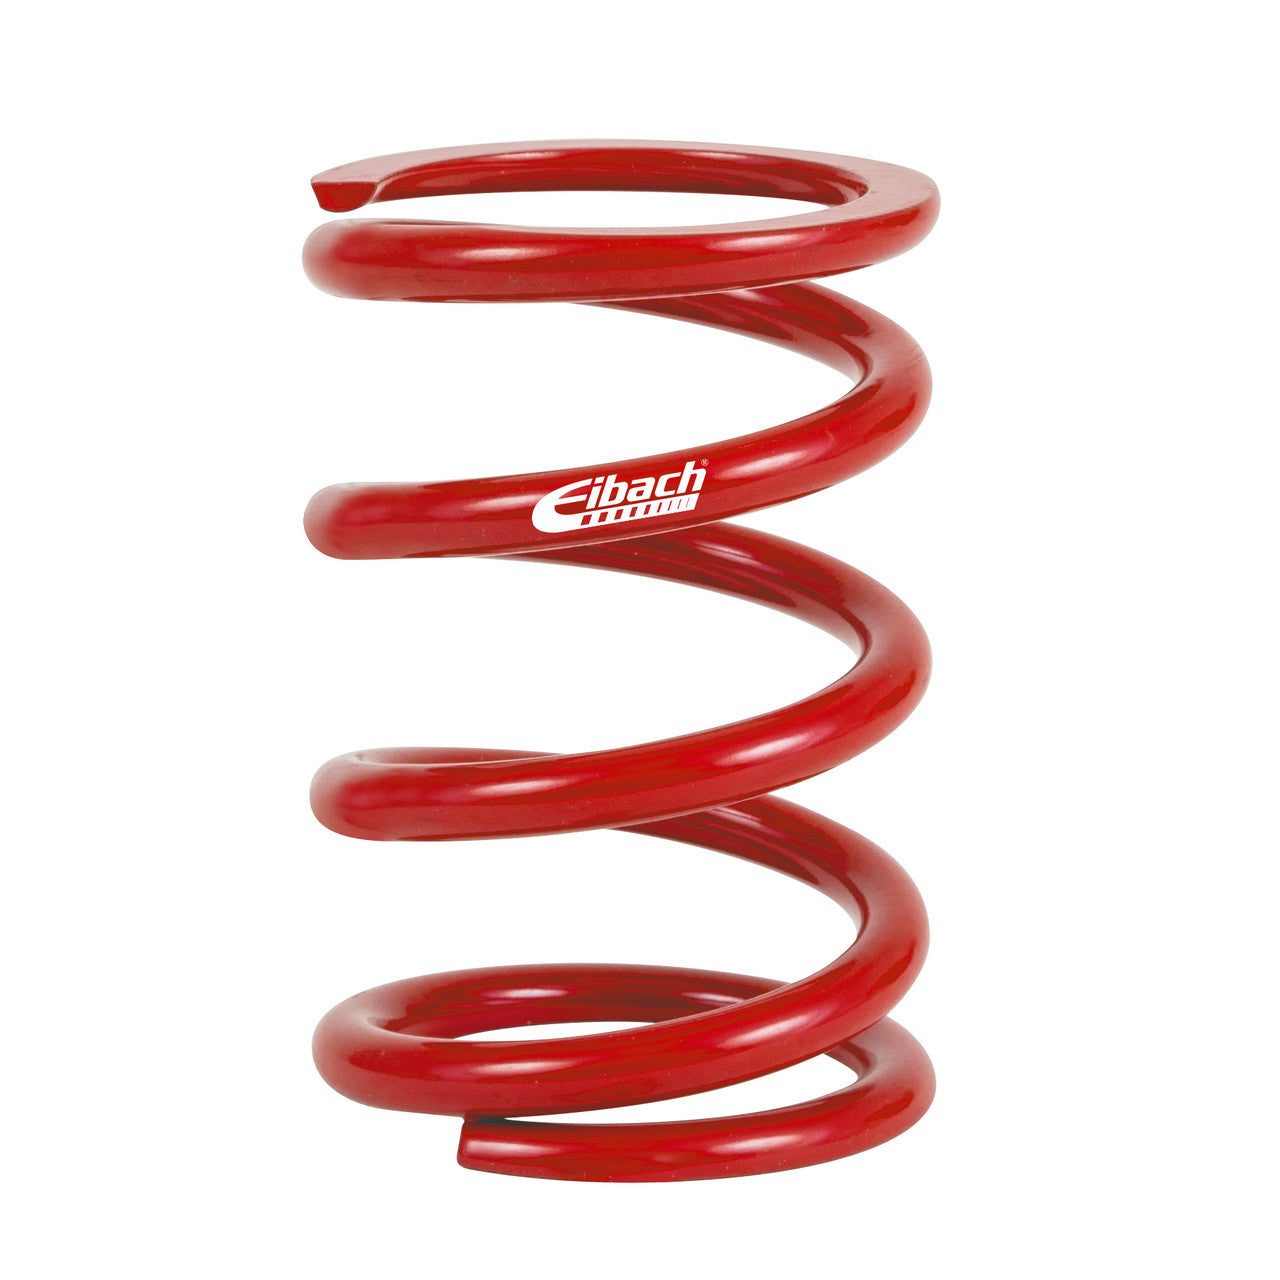 Eibach Metric Coilover Spring - 60MM I.D. 100-60-0650